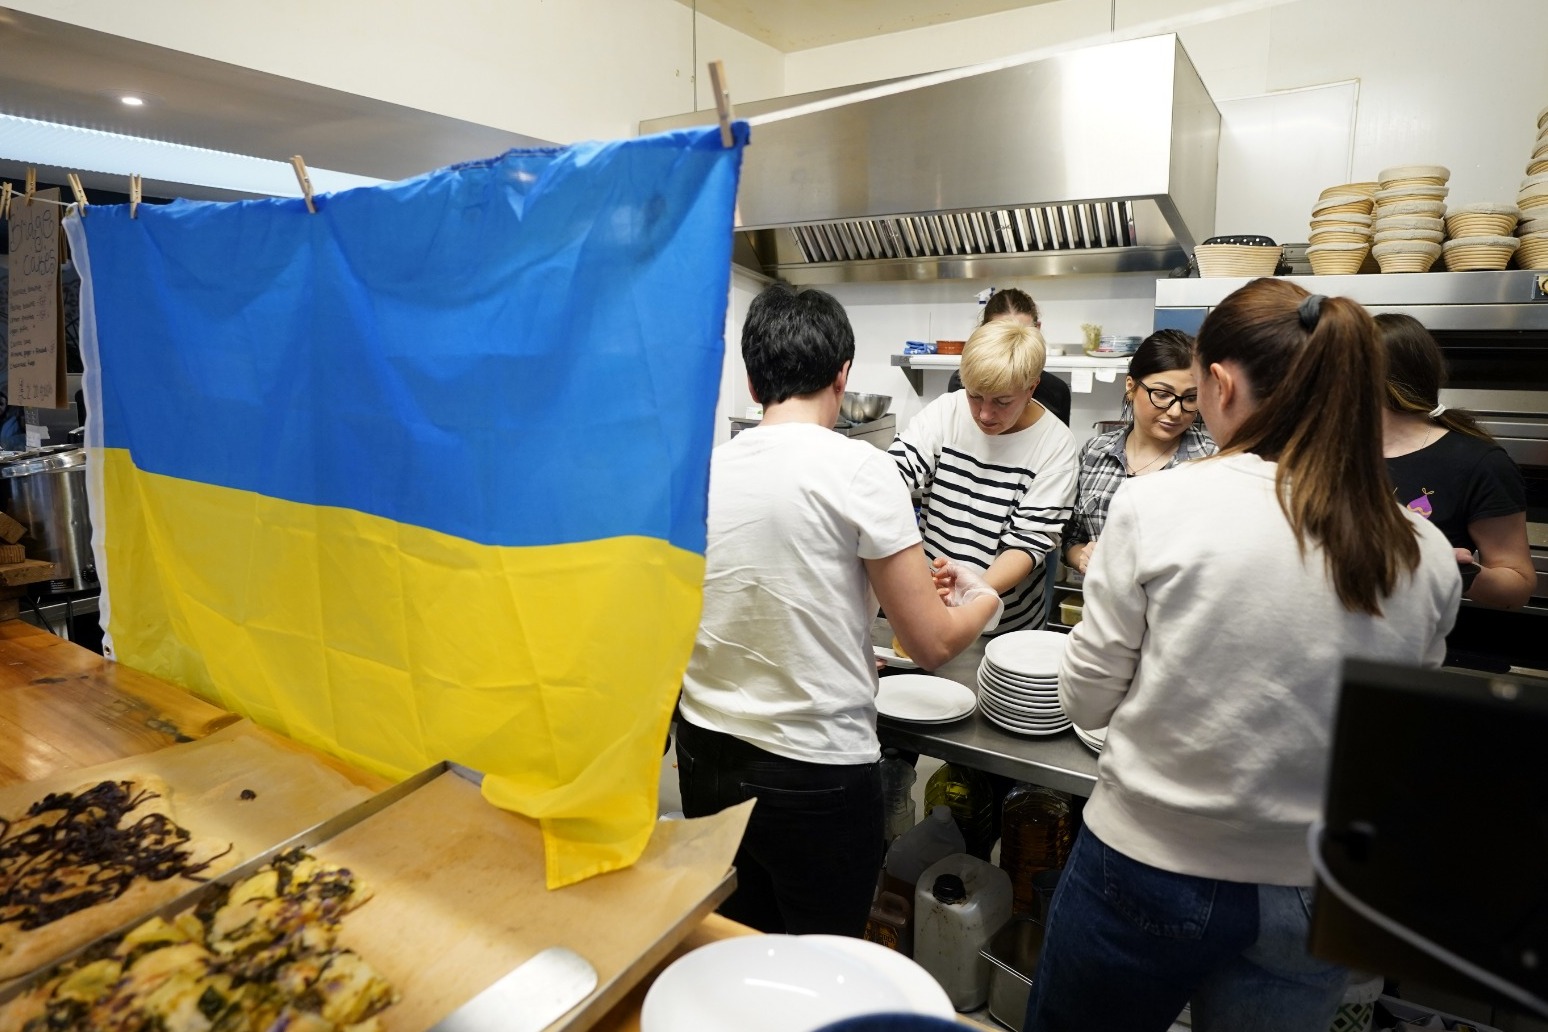 Charity Event in Somerset Raises Around £1500 By Cooking Ukrainian Meals 